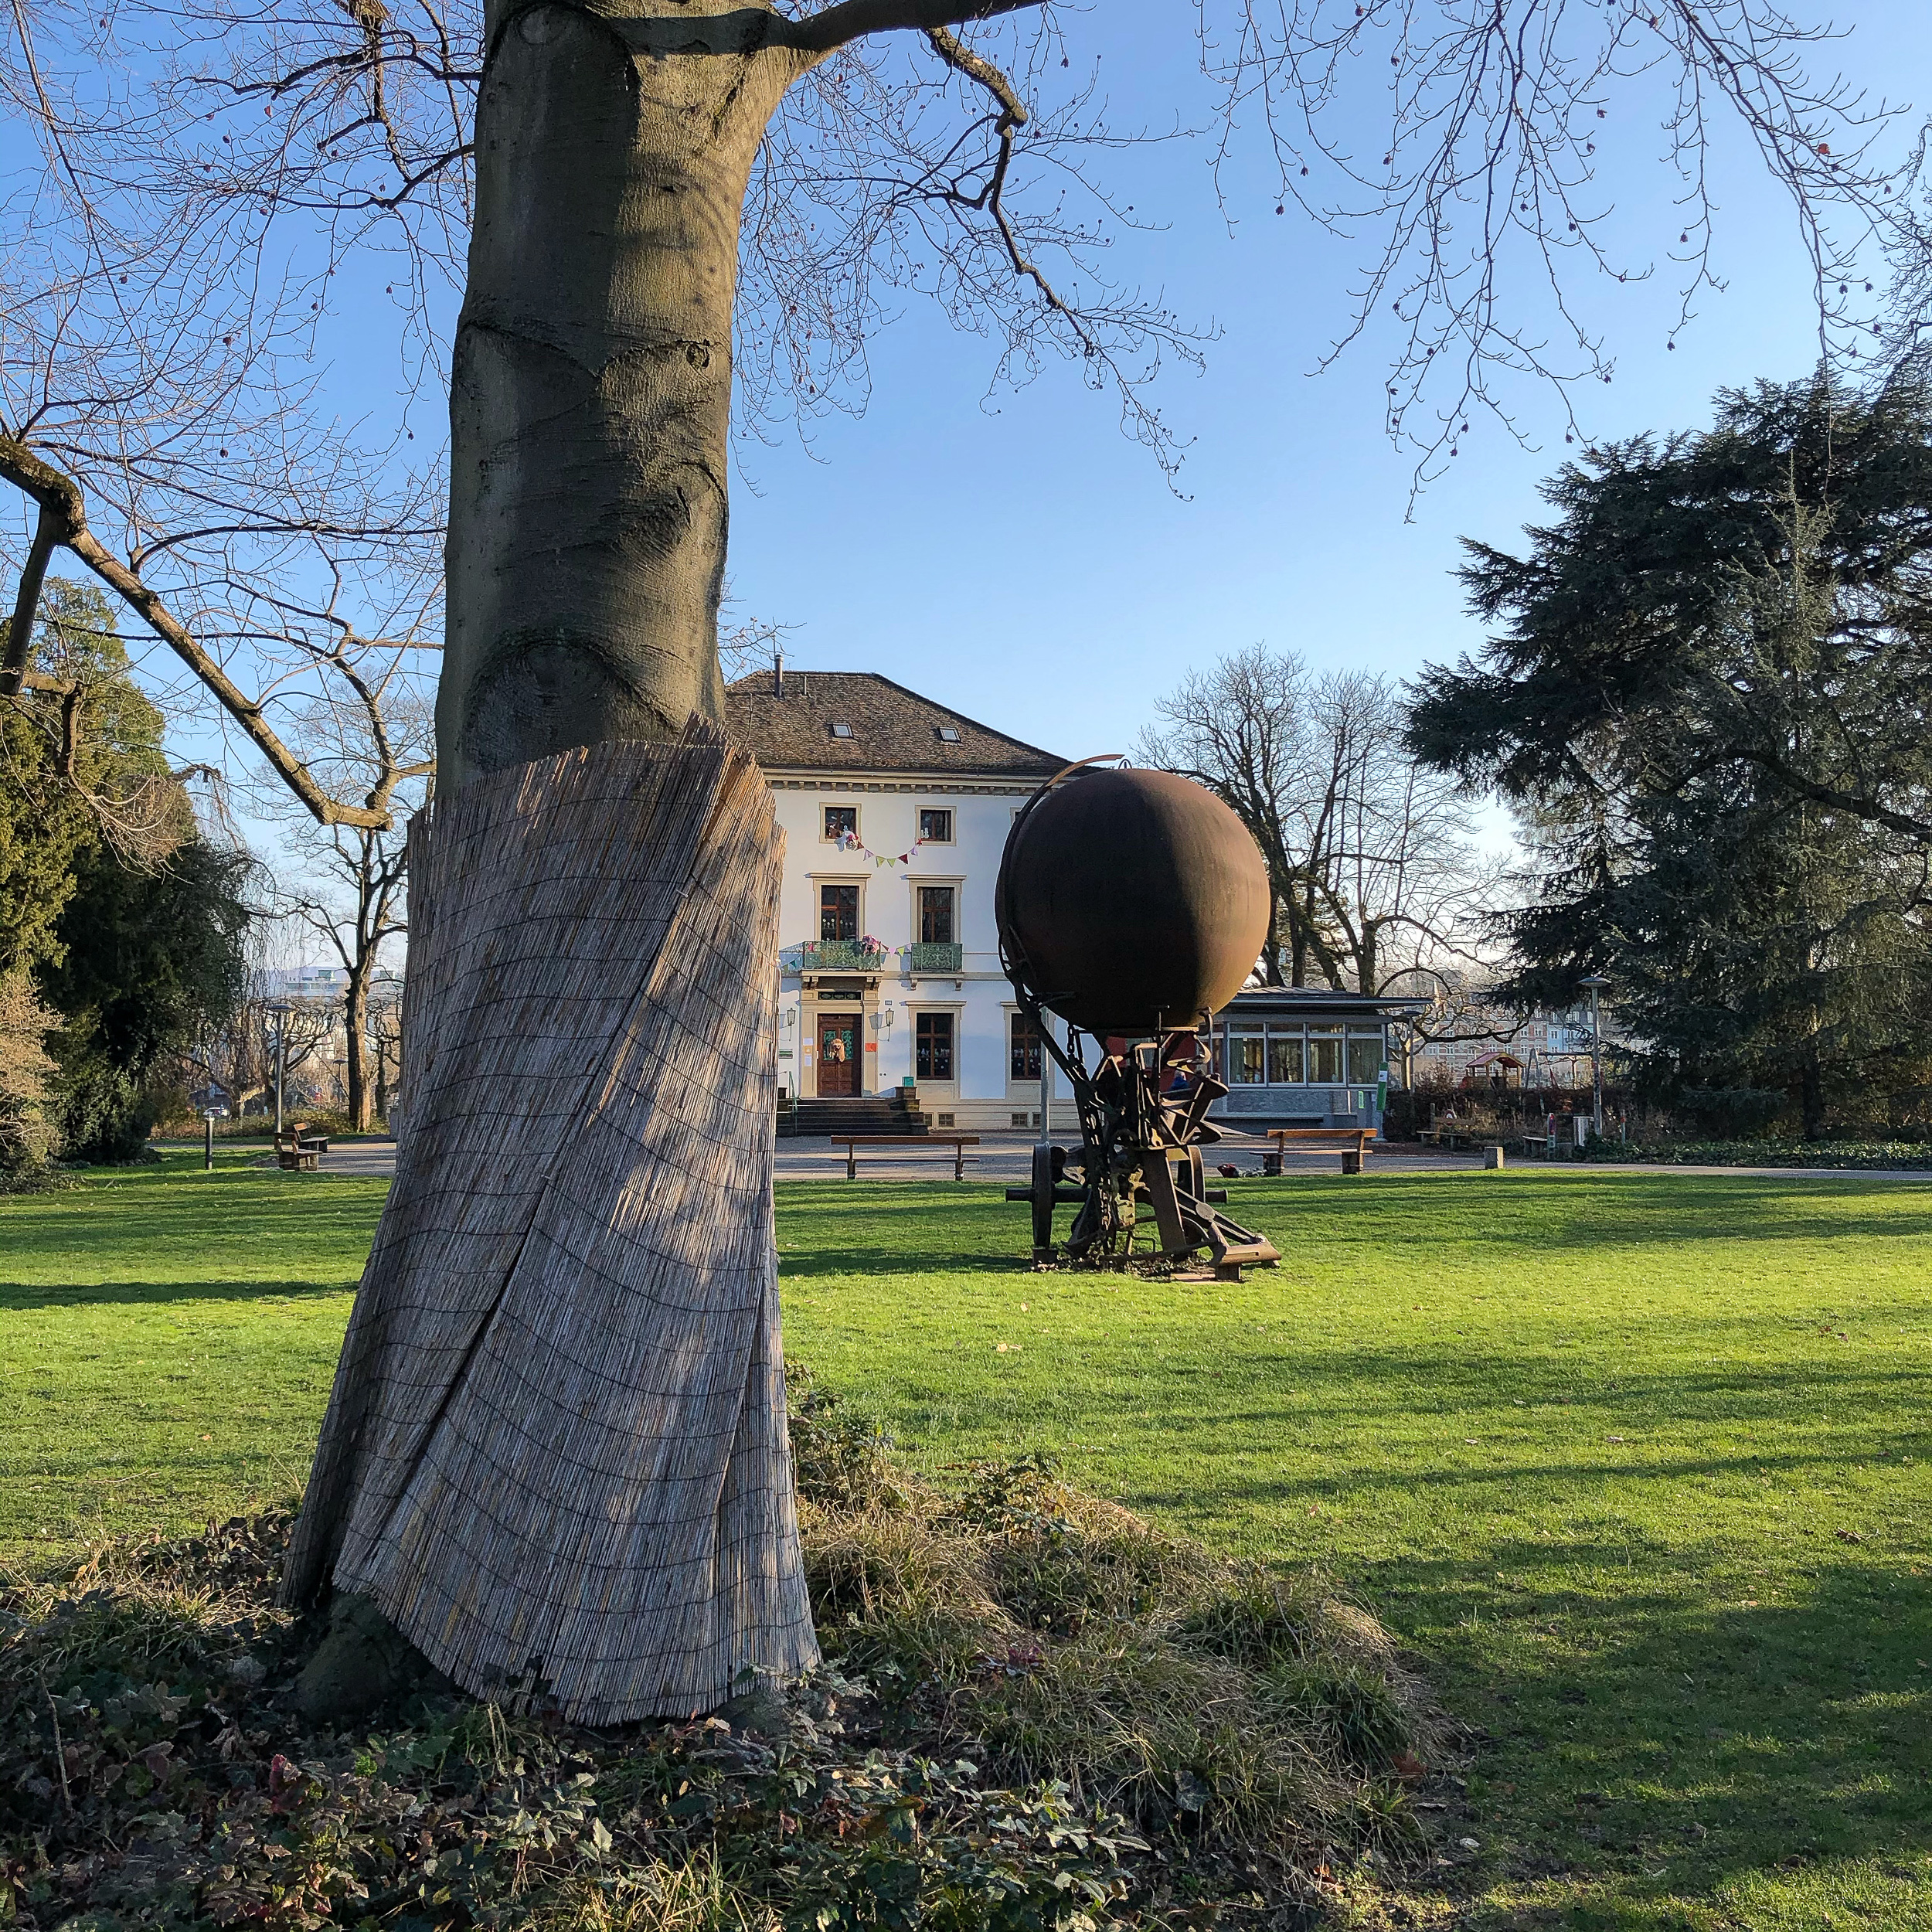 The sphere and the grumpy tree with skirt